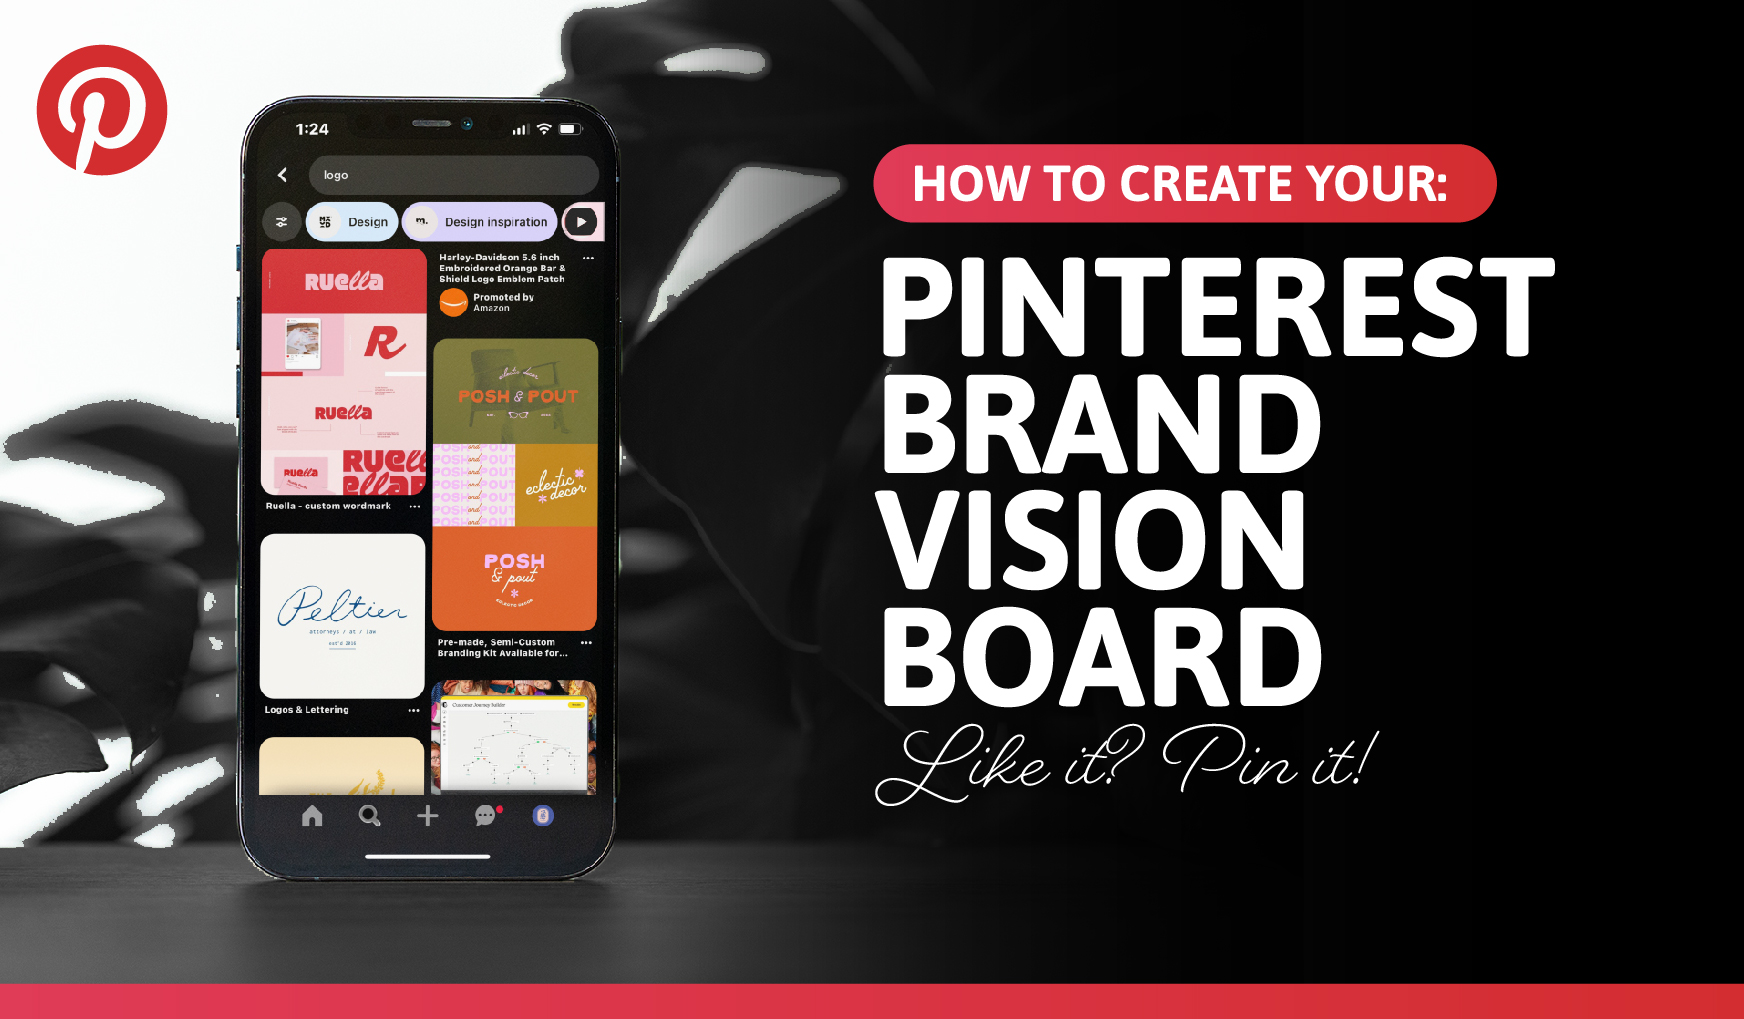 Let’s Create your Pinterest Brand Vision Board